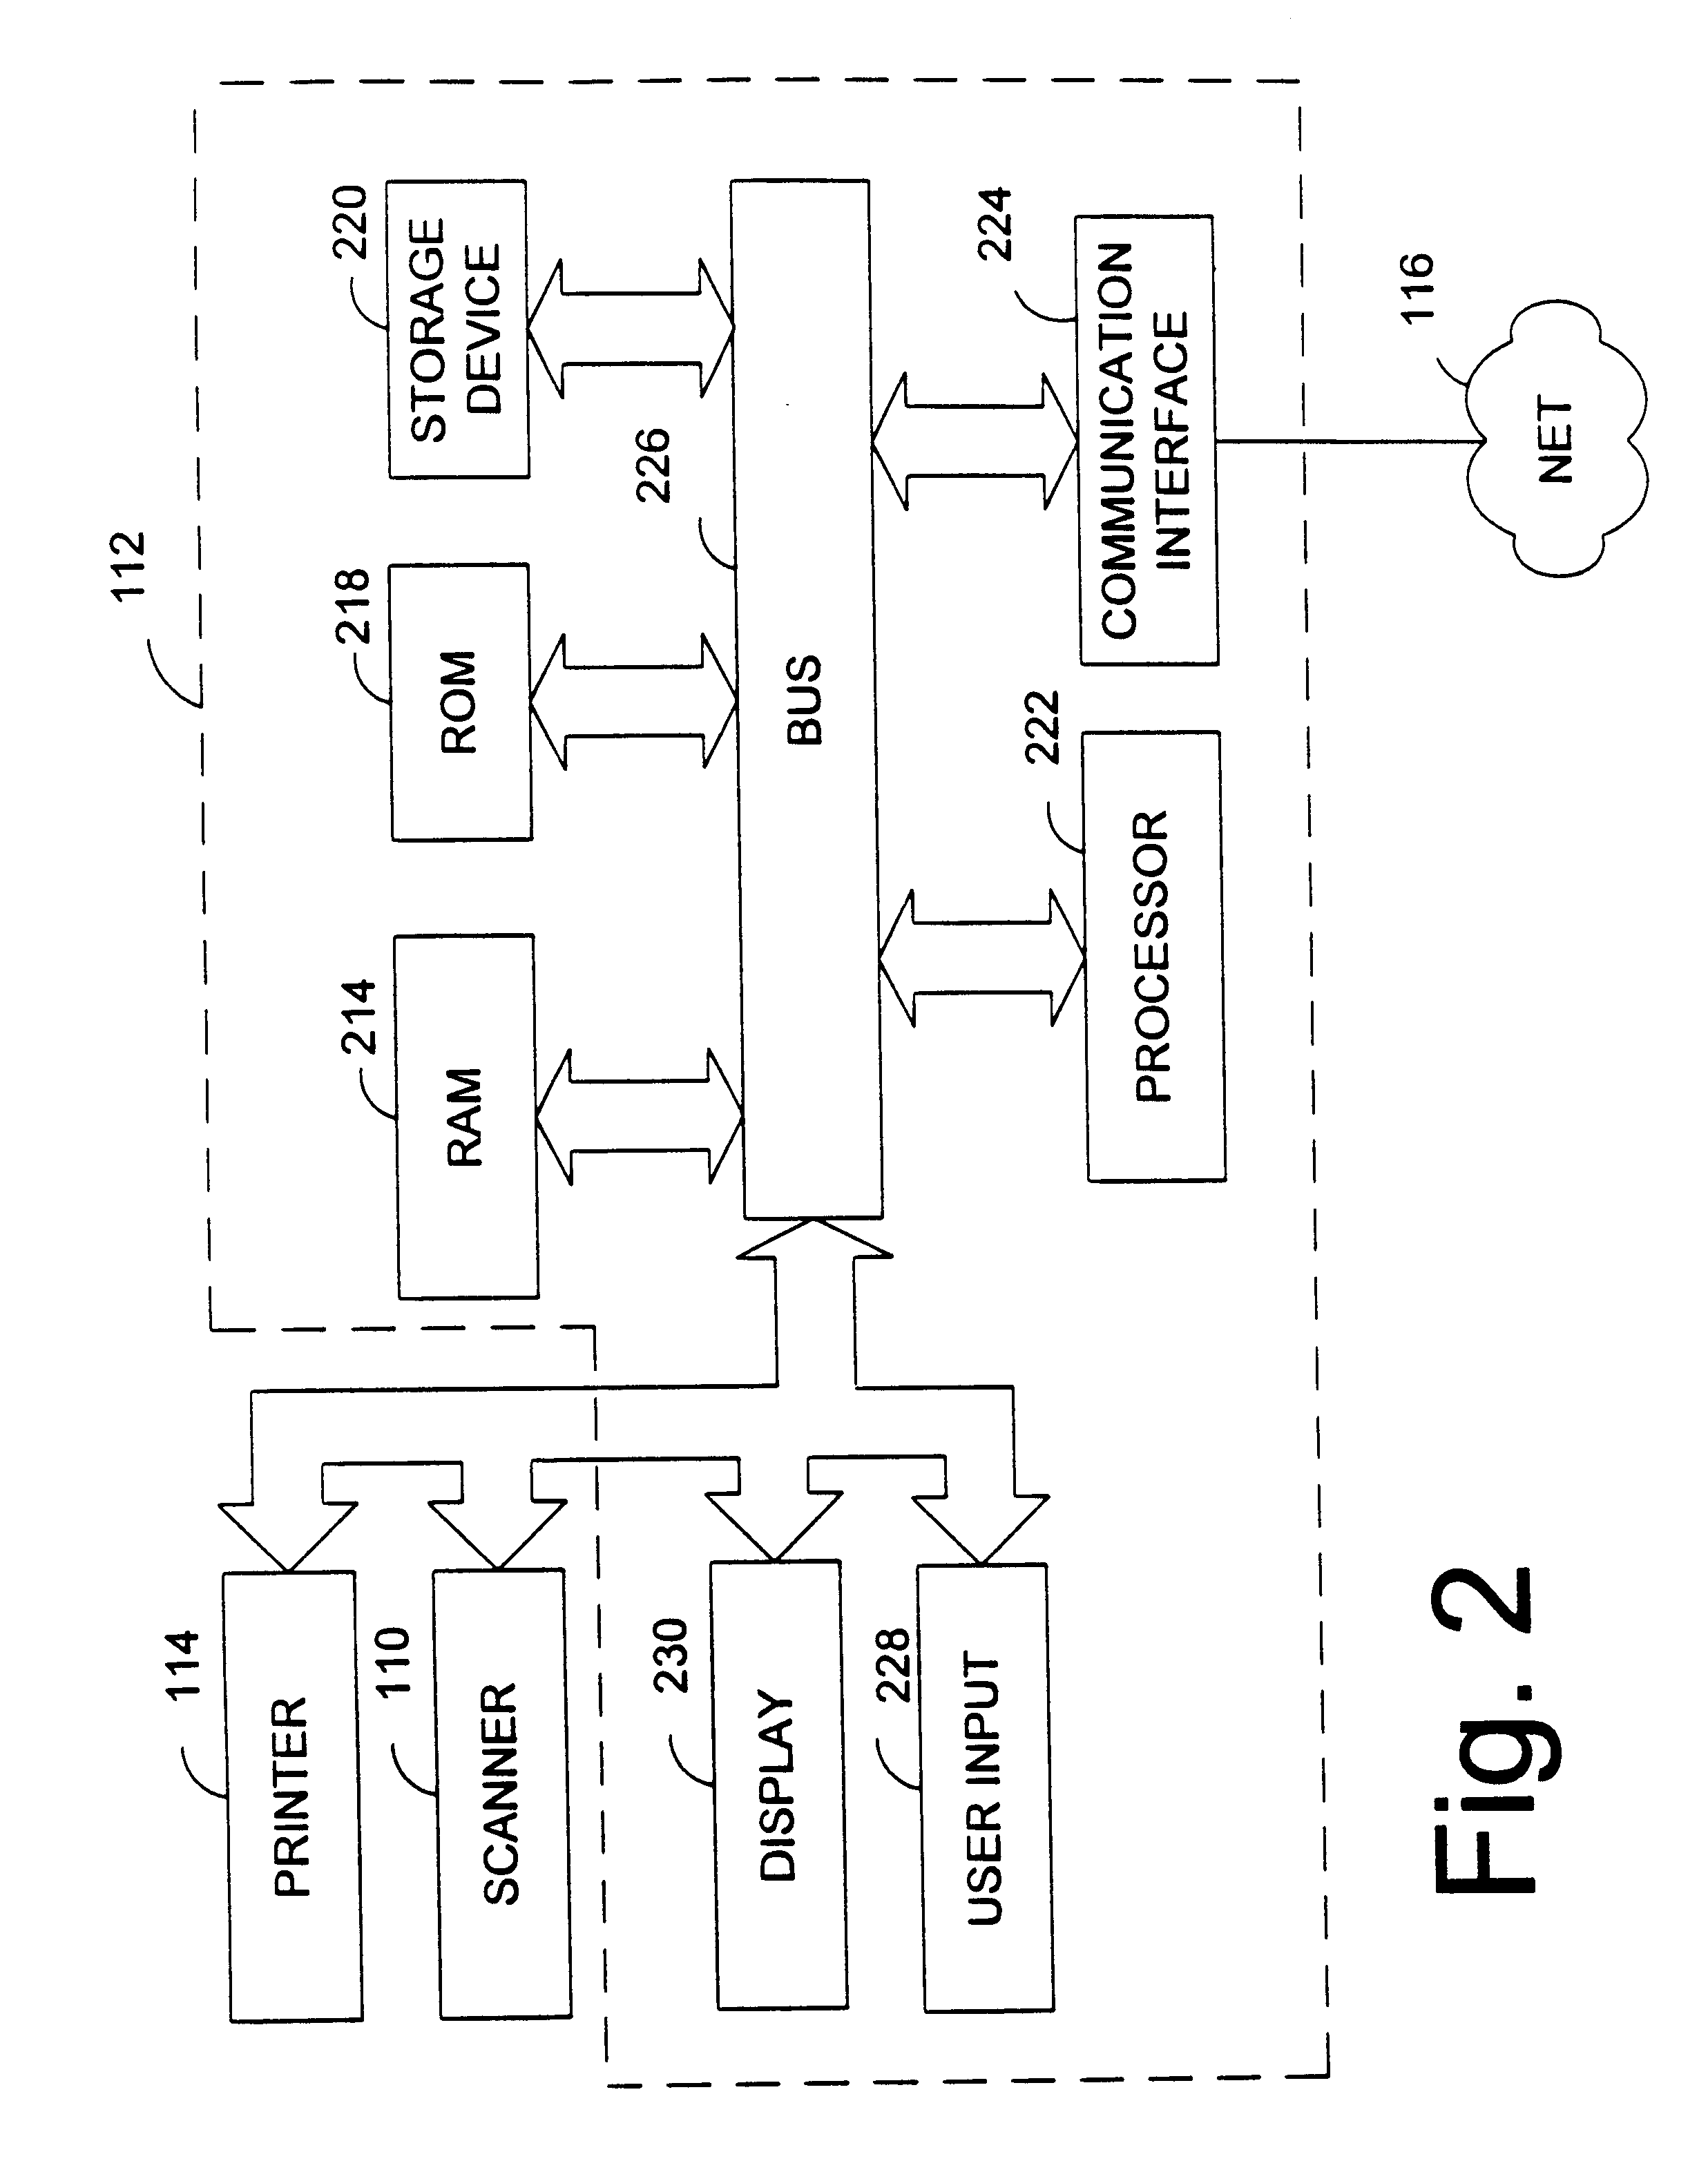 Apparatus and method for determining an area encompassing an image for scanning the image